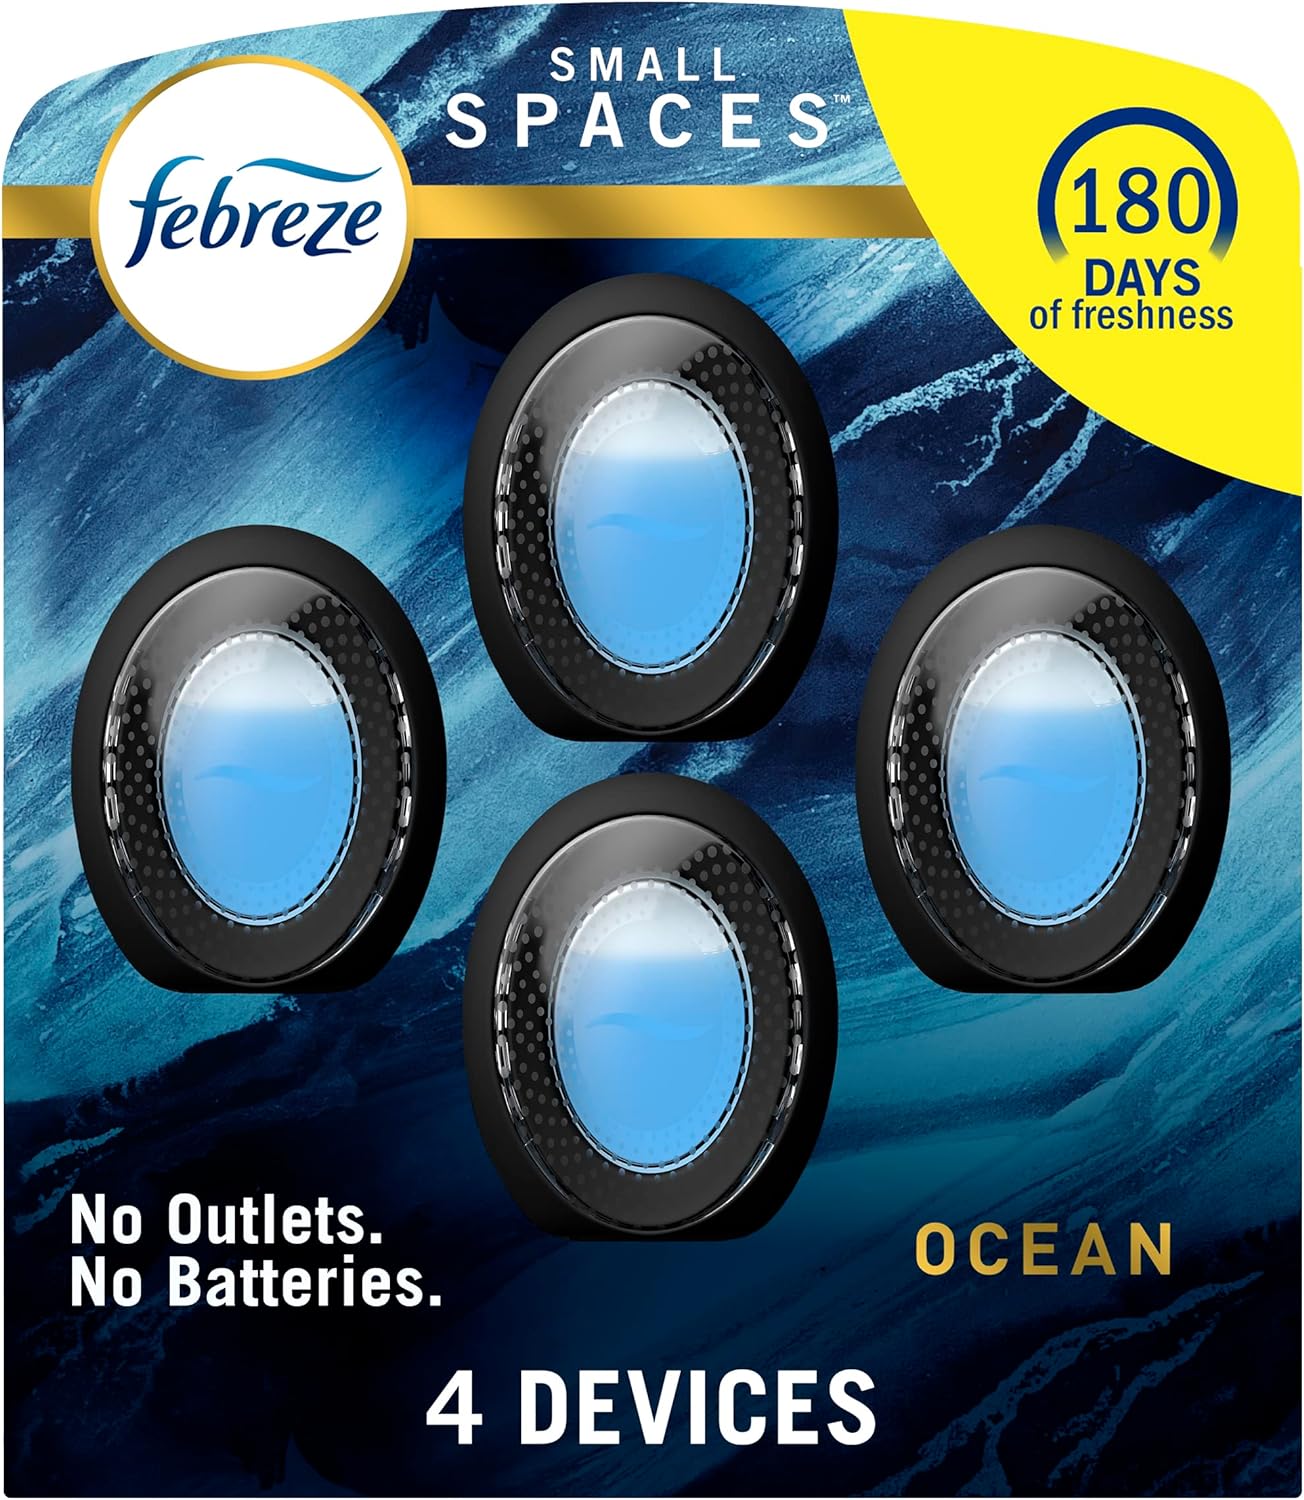 Febreze Small Spaces, Plug in Air Freshener Alternative for home, Odor Fighter Air Freshener, Ocean Scent,25 fl. oz, Pack of 4